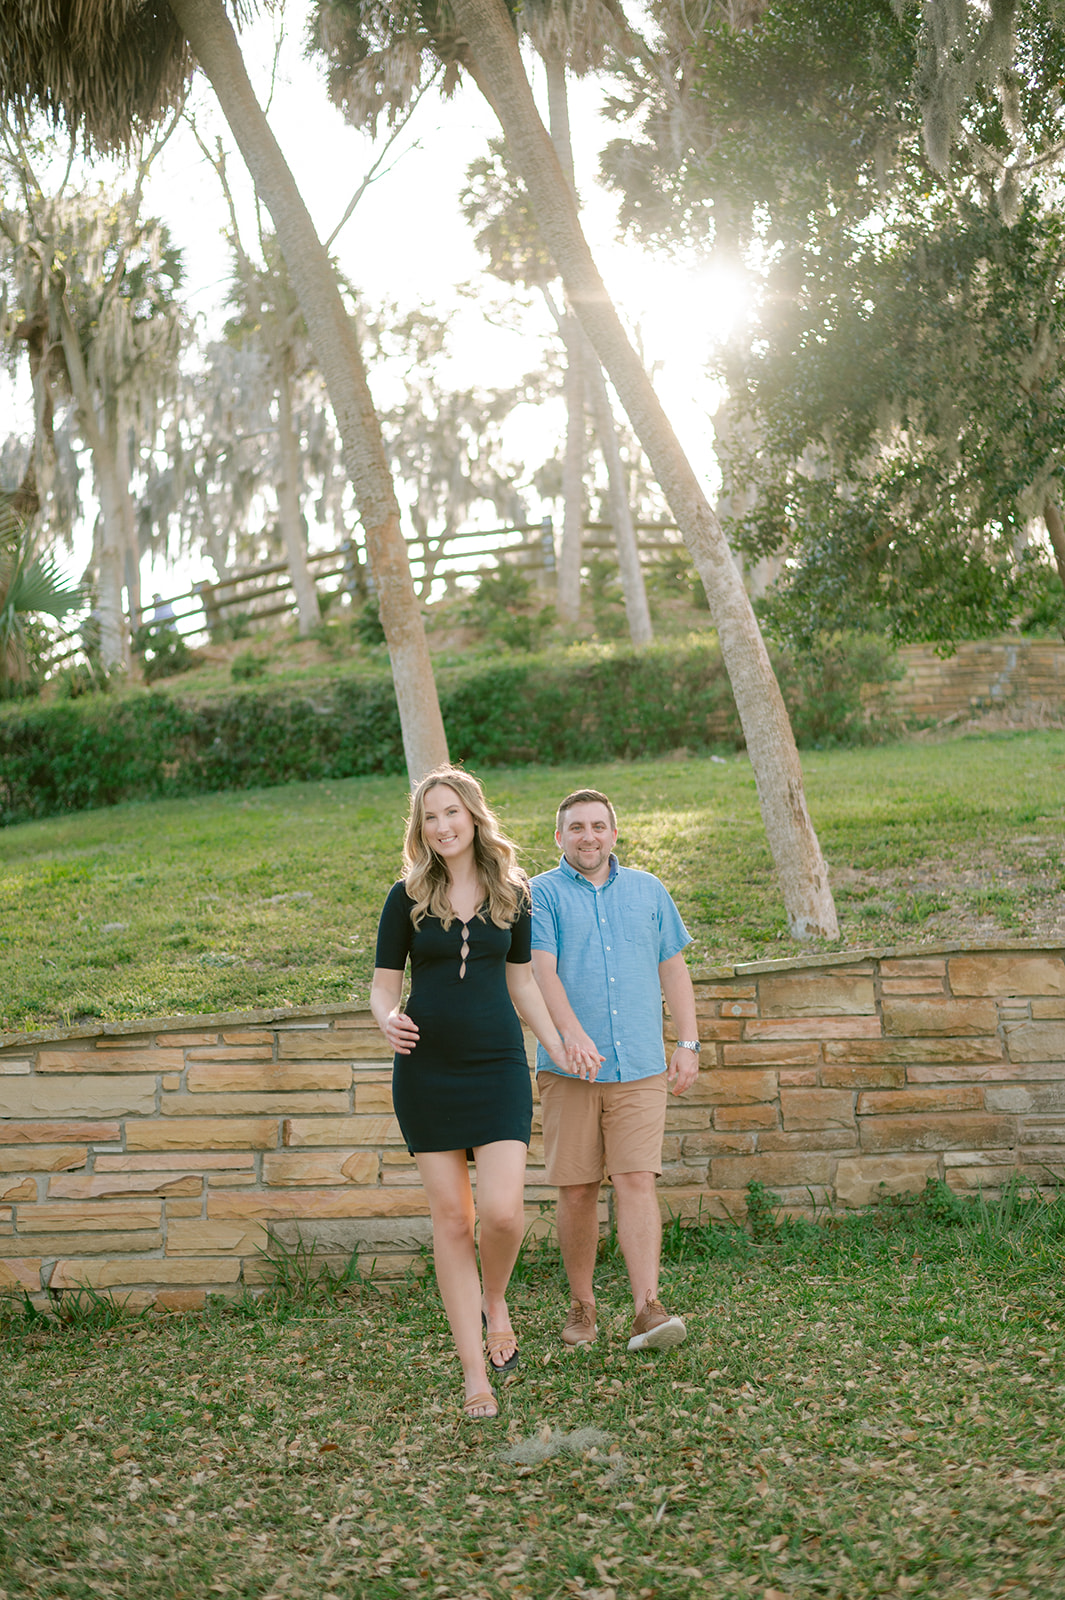 "Candid and intimate engagement photo with stunning Tampa scenery"
